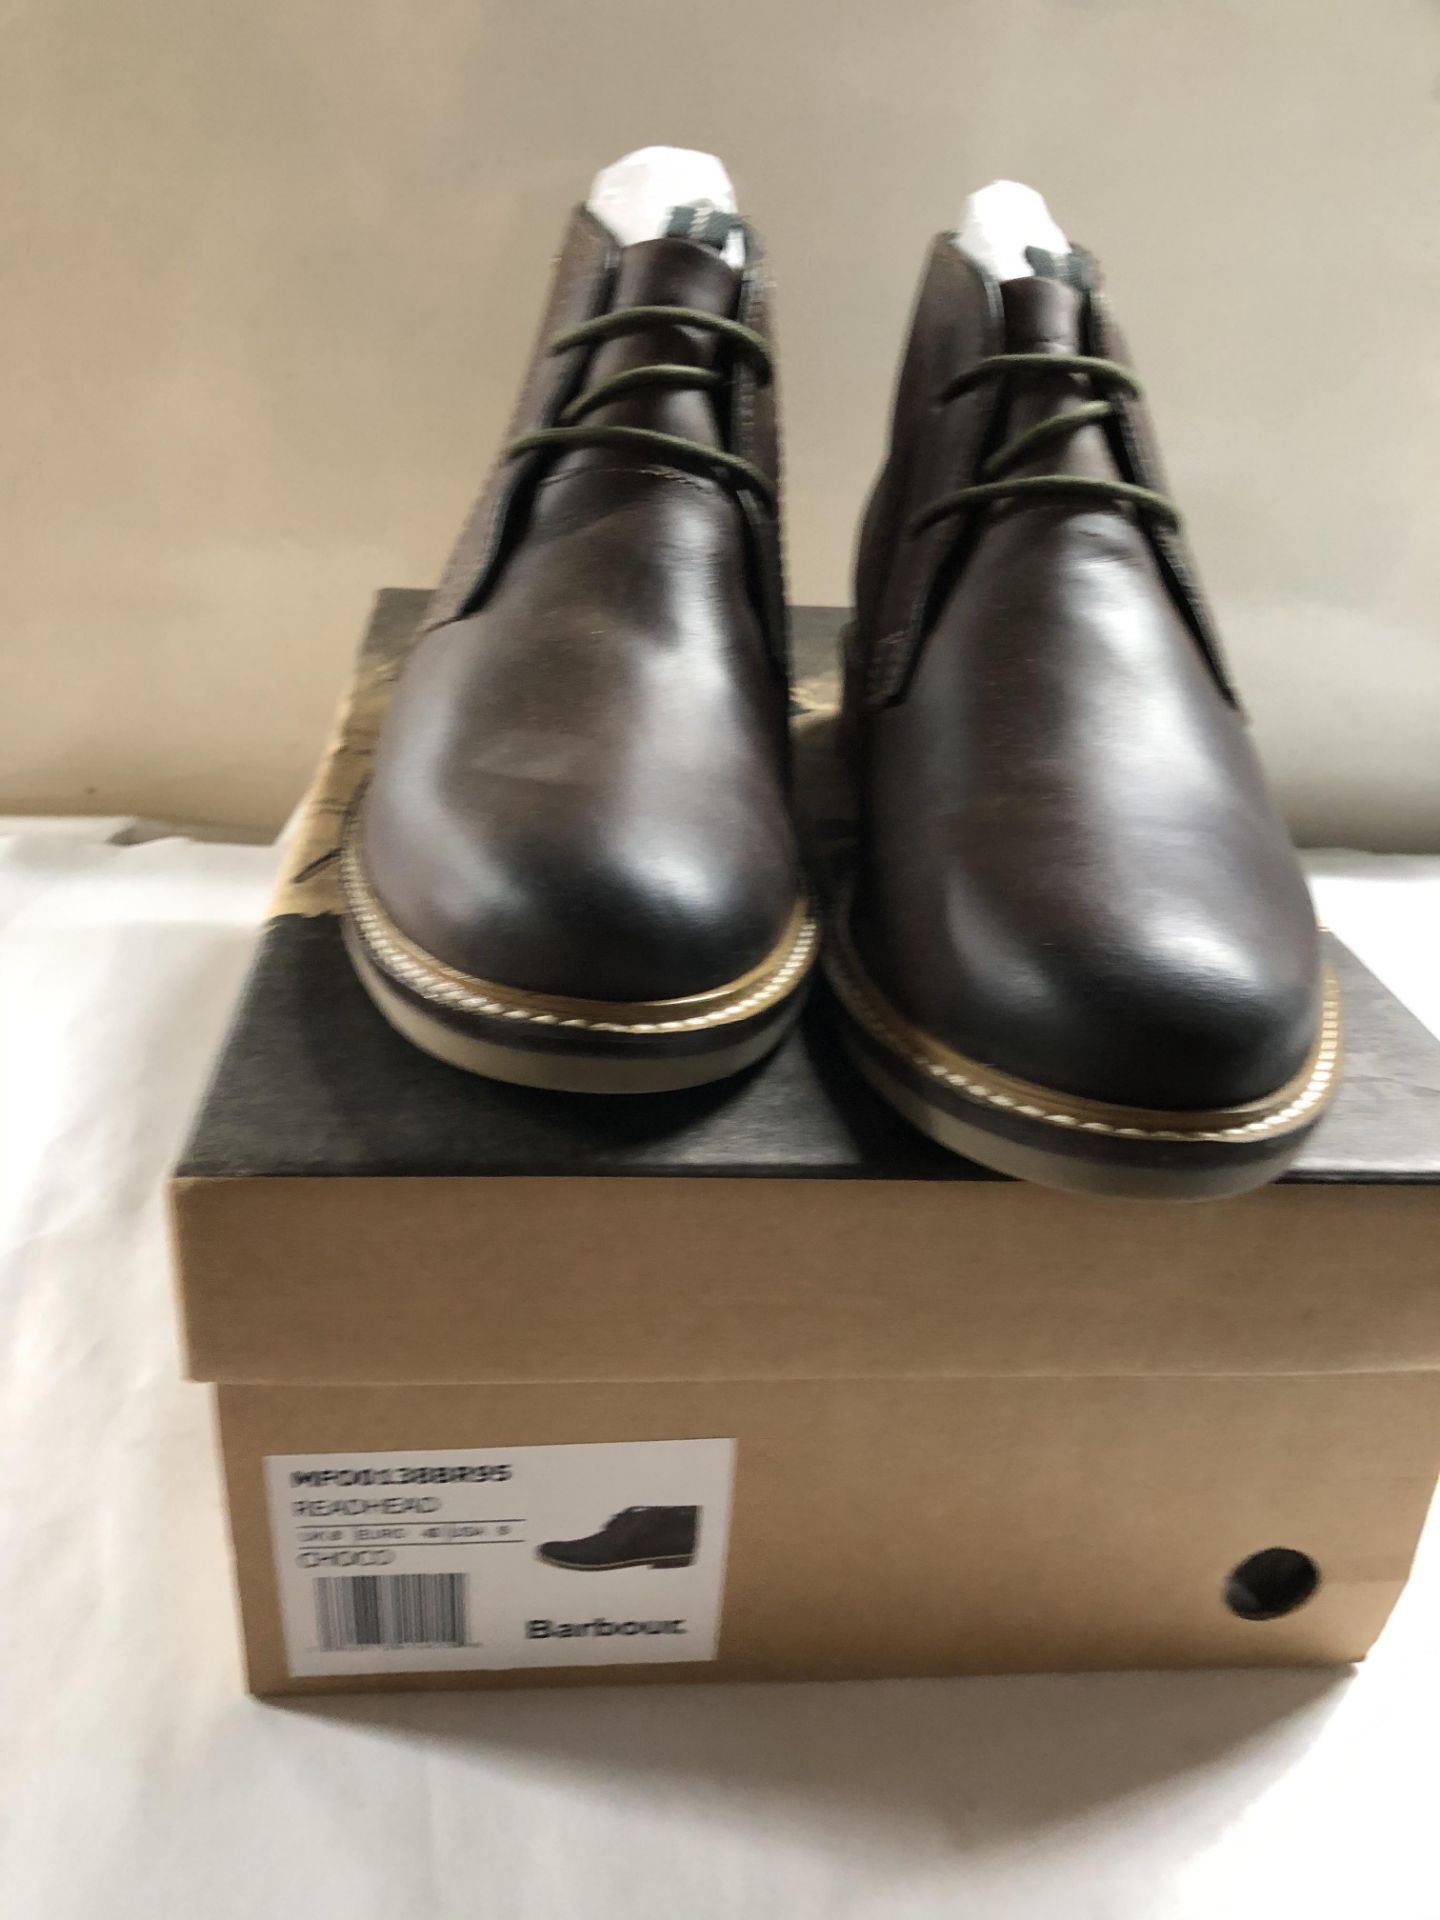 Barbour Men's Boots - Image 2 of 4